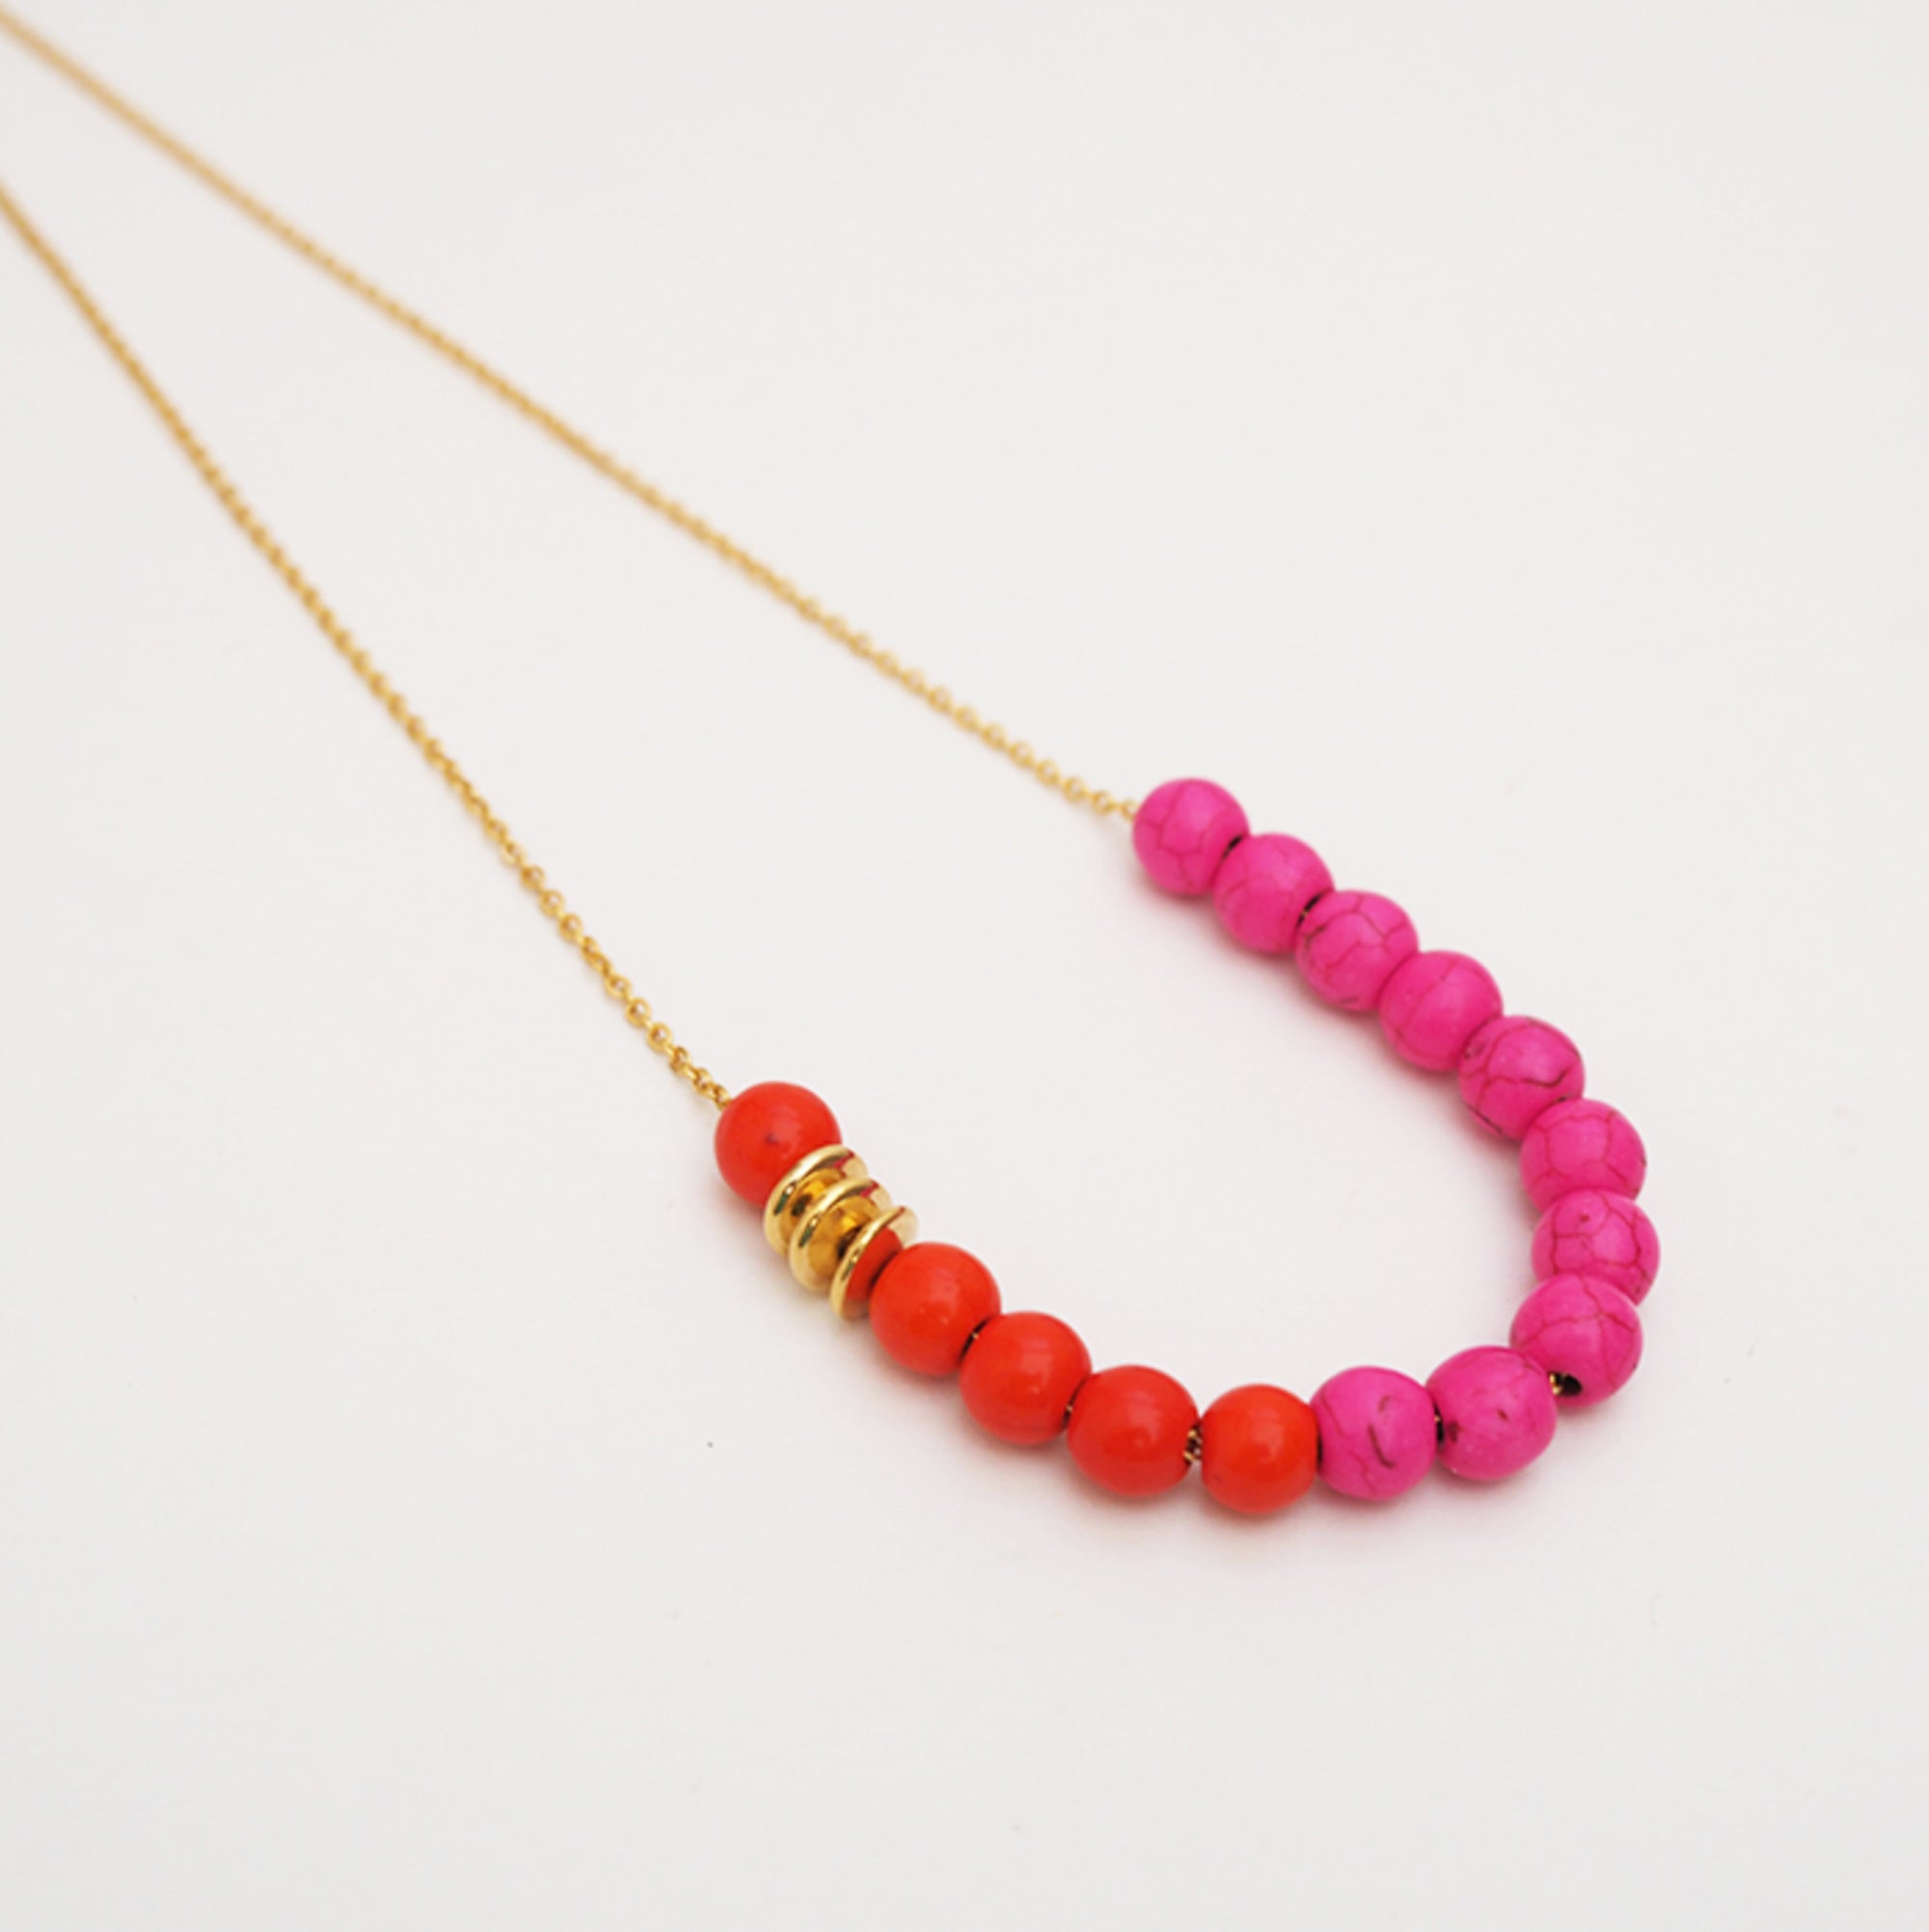 Abacus pink and orange necklace